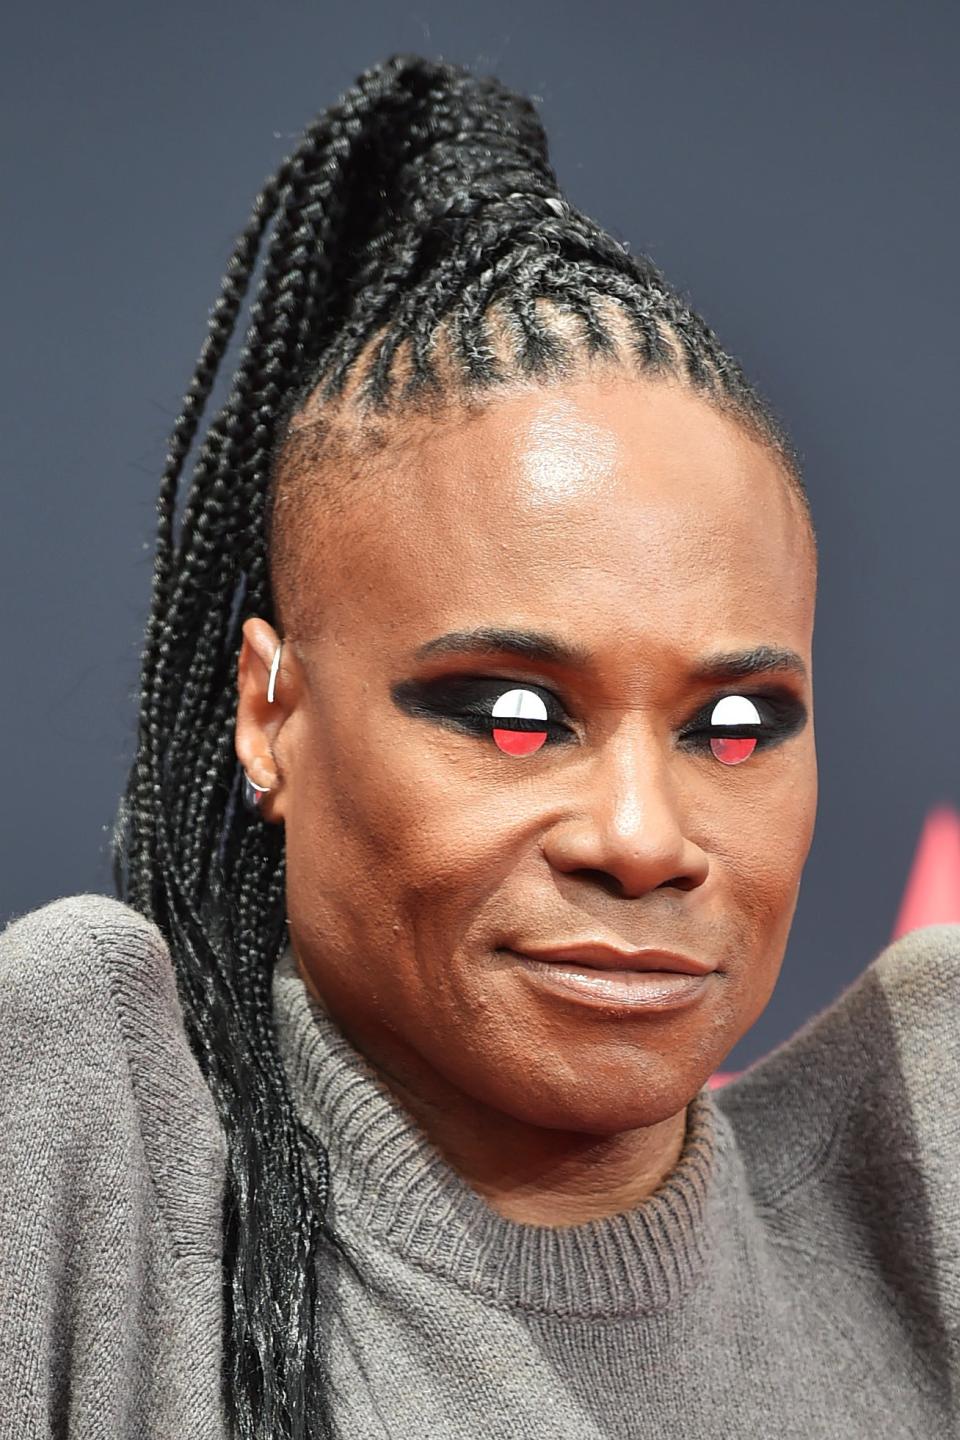 Billy in a soft outfit poses on the red carpet with braided hair and dramatic makeup